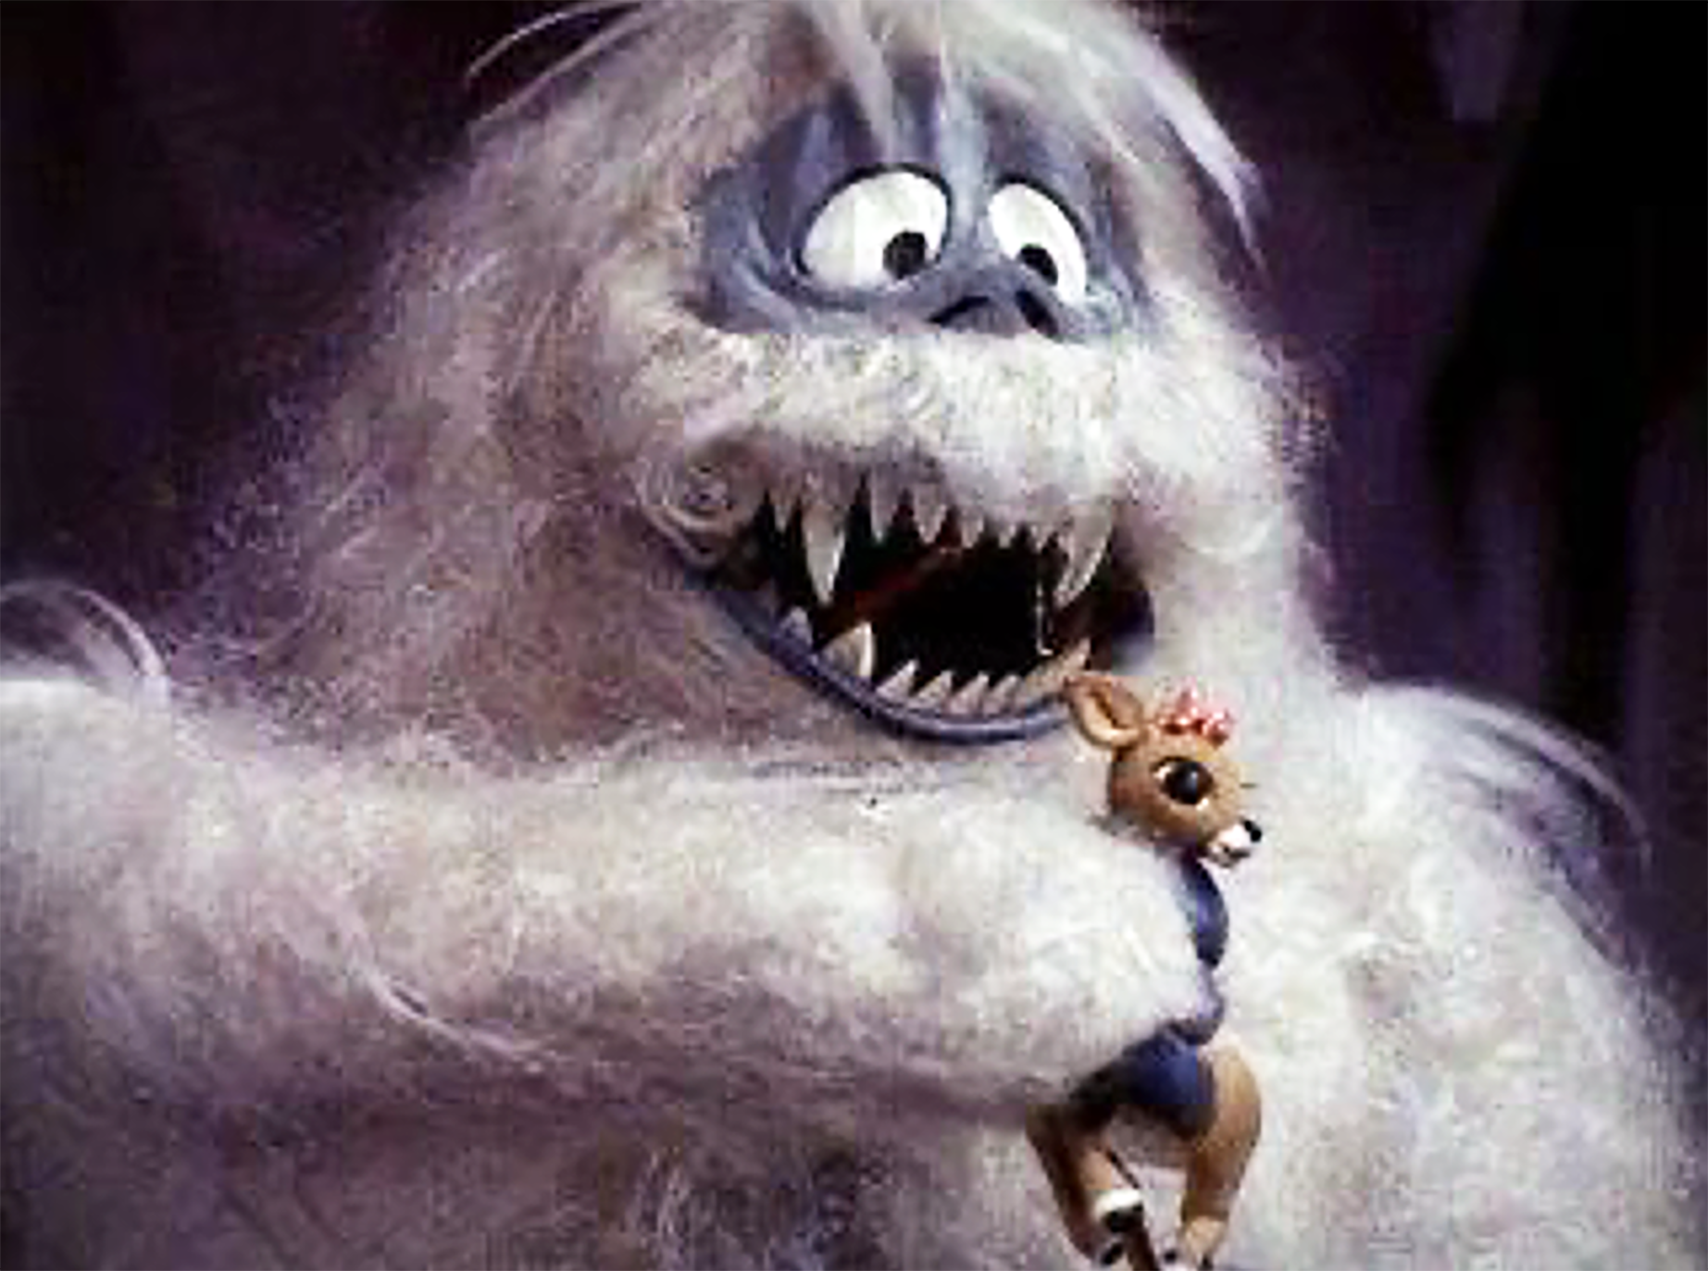 The Abominable Snow Monster holding Rudolph in its hands.